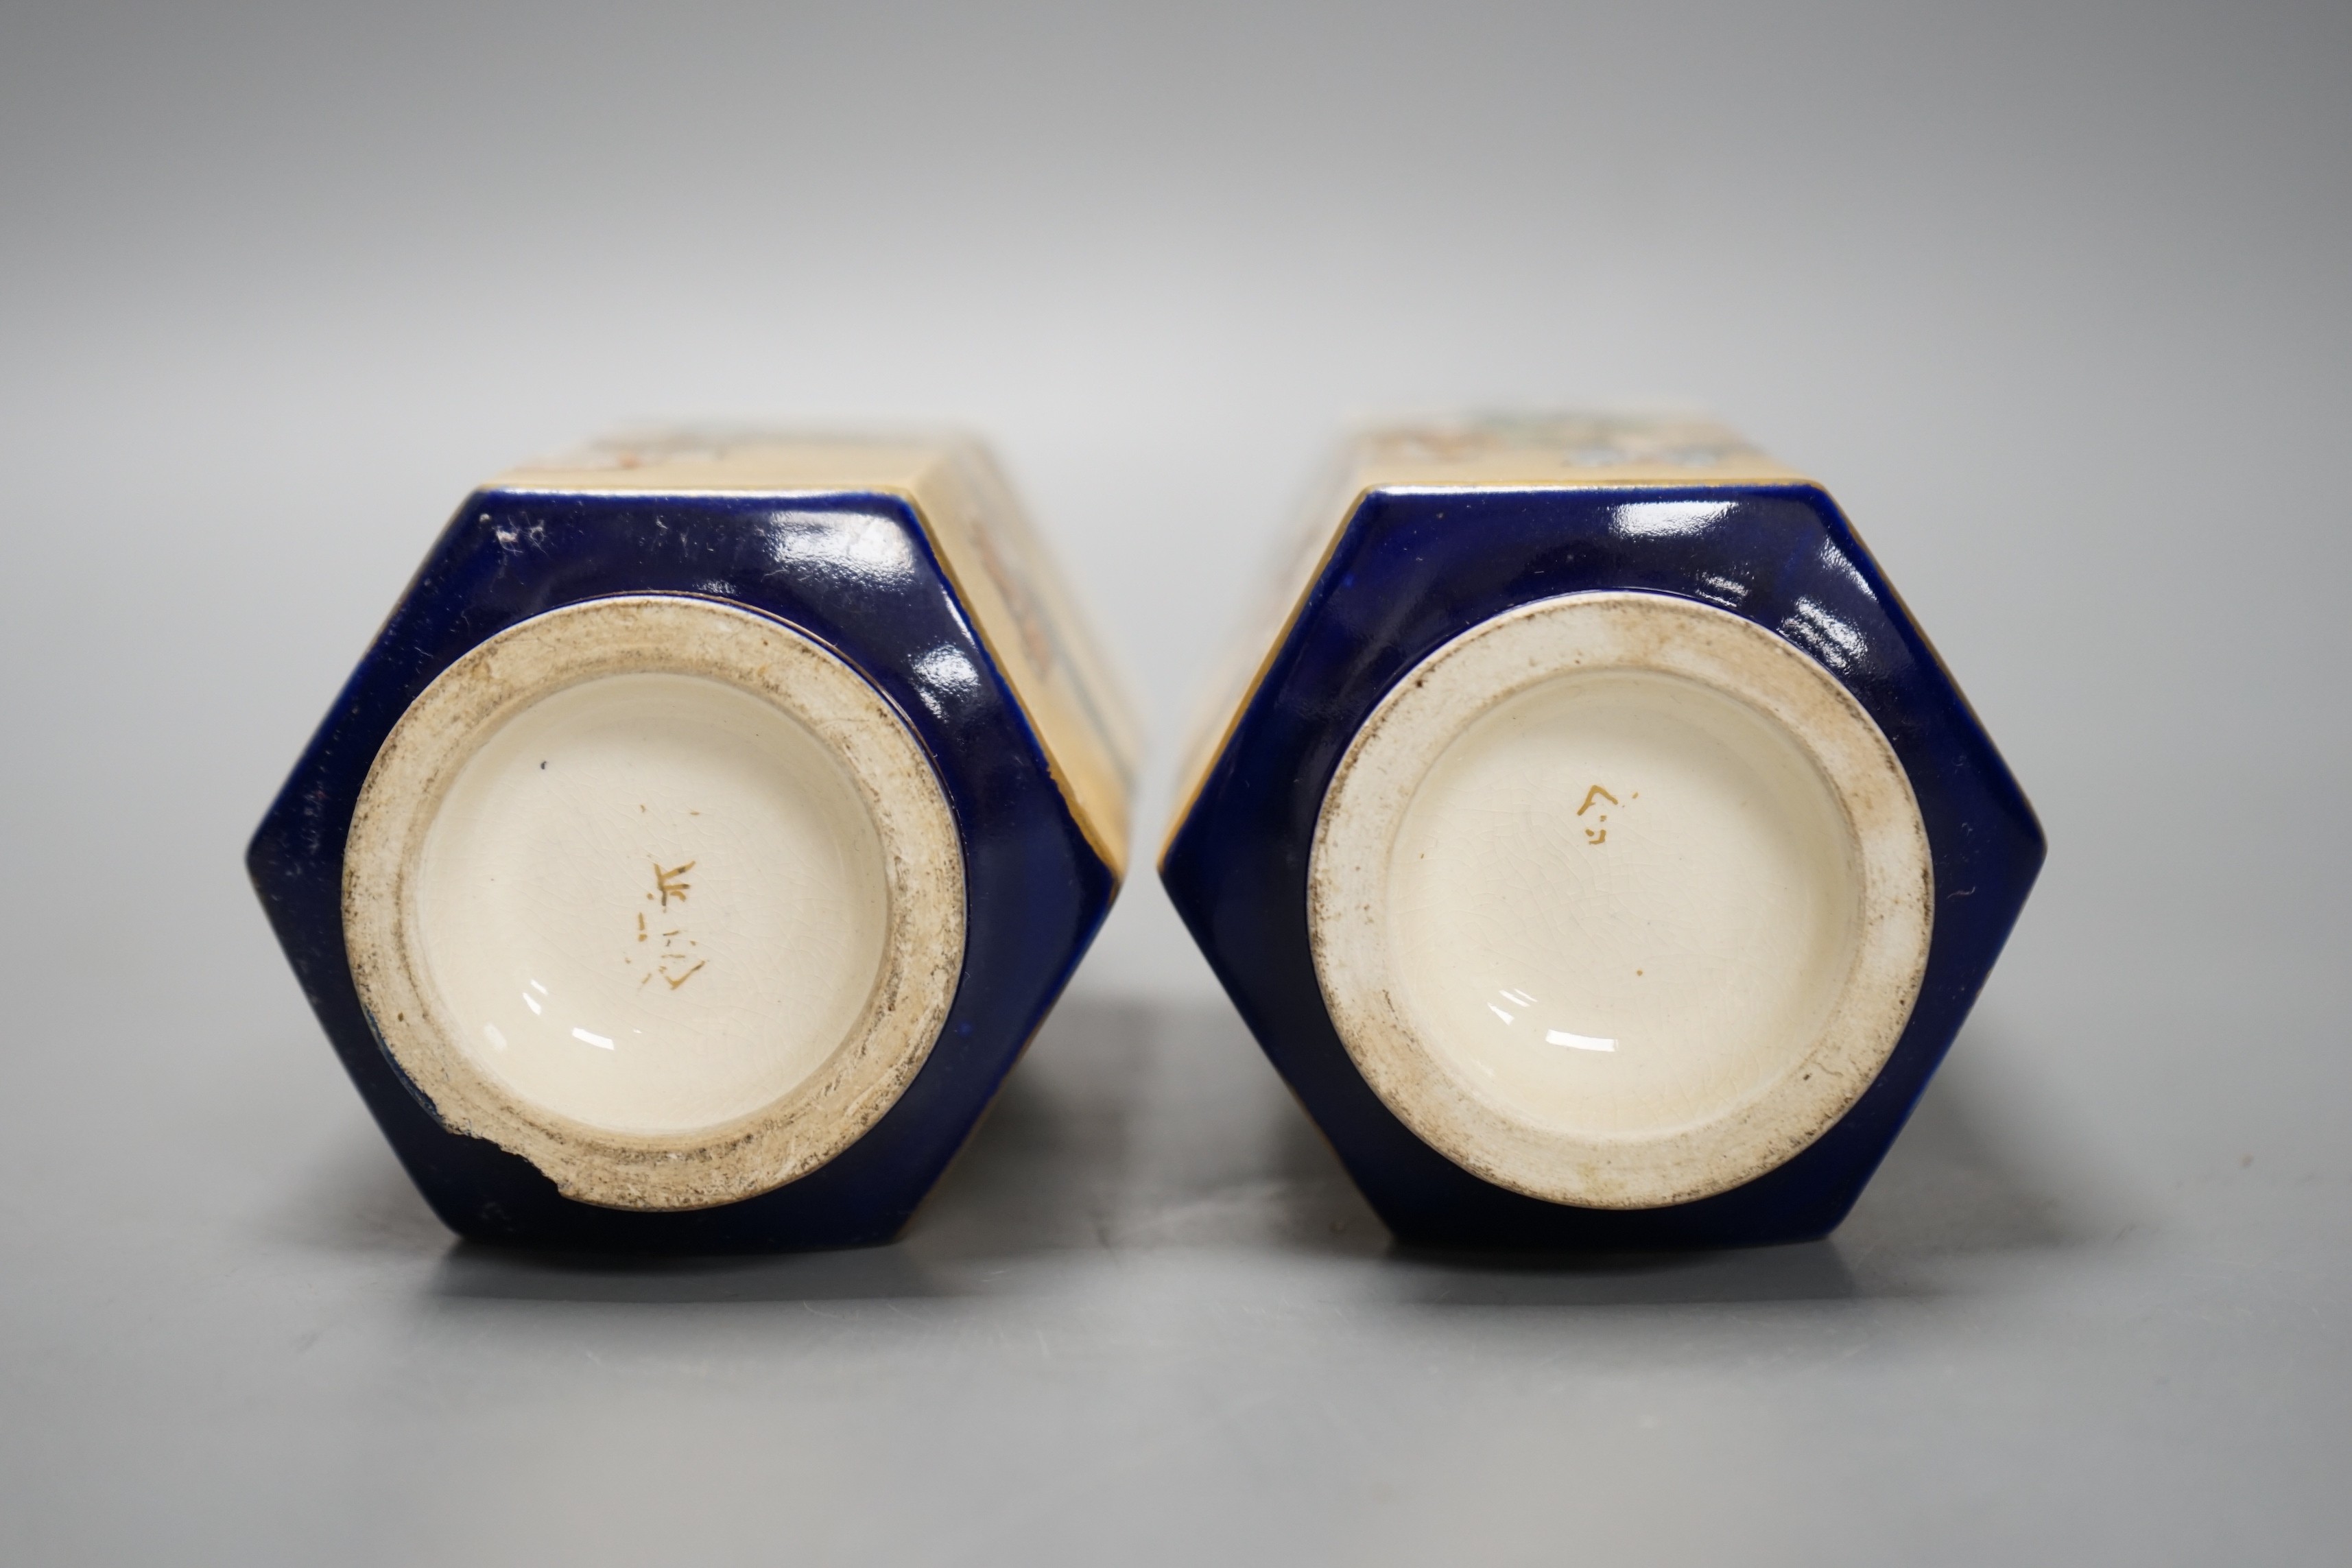 A pair of Japanese Satsuma pottery hexagonal vases, Meiji period, on stands 16cm